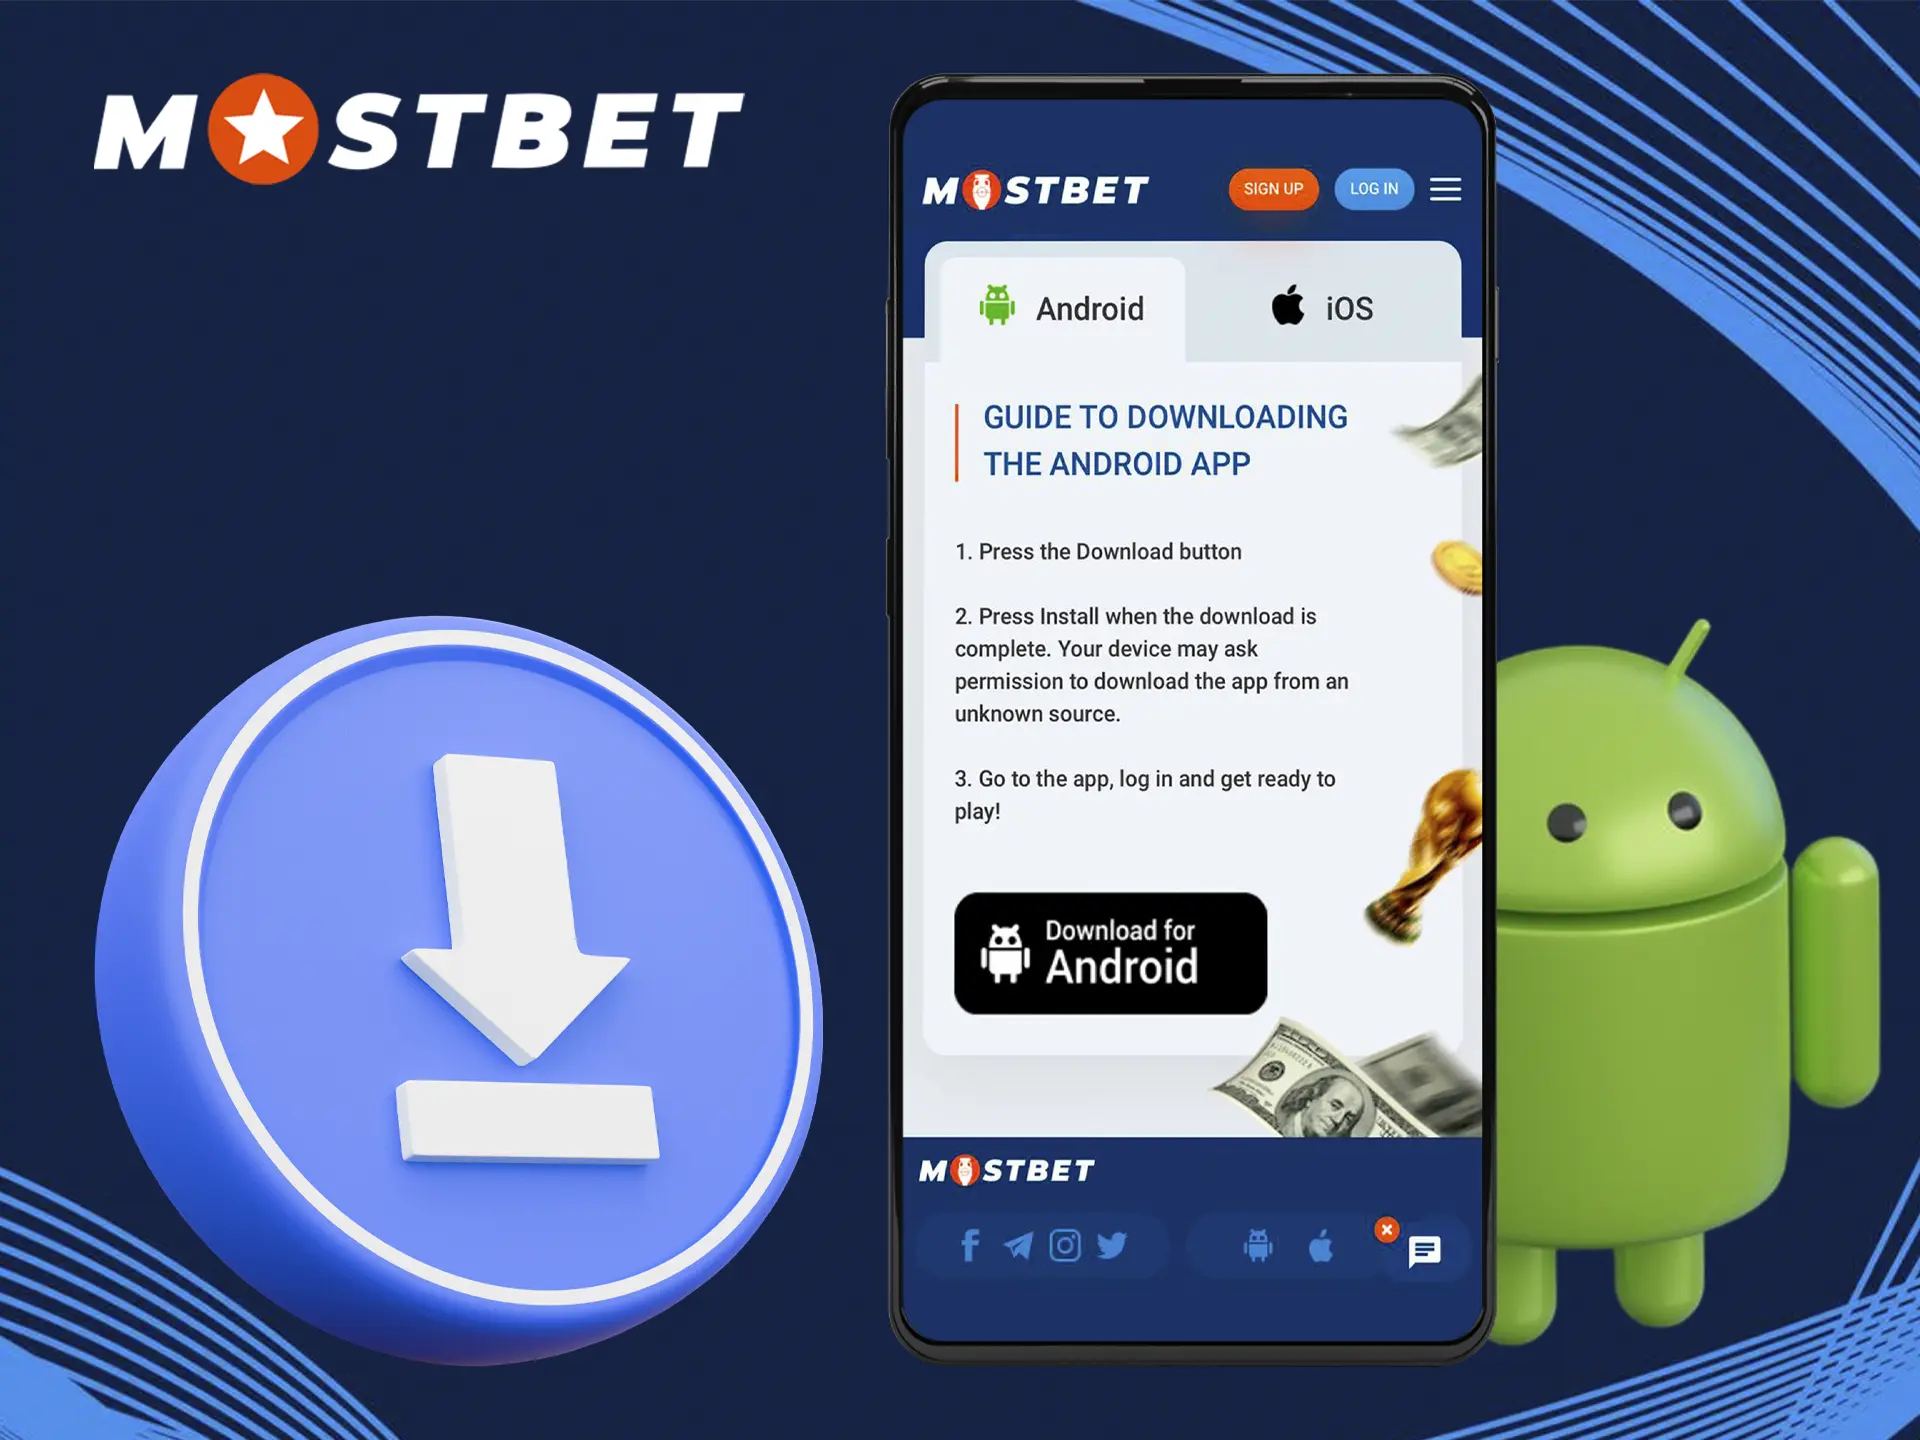 Update the Mostbet app to keep up to date with the latest promotions and offers.